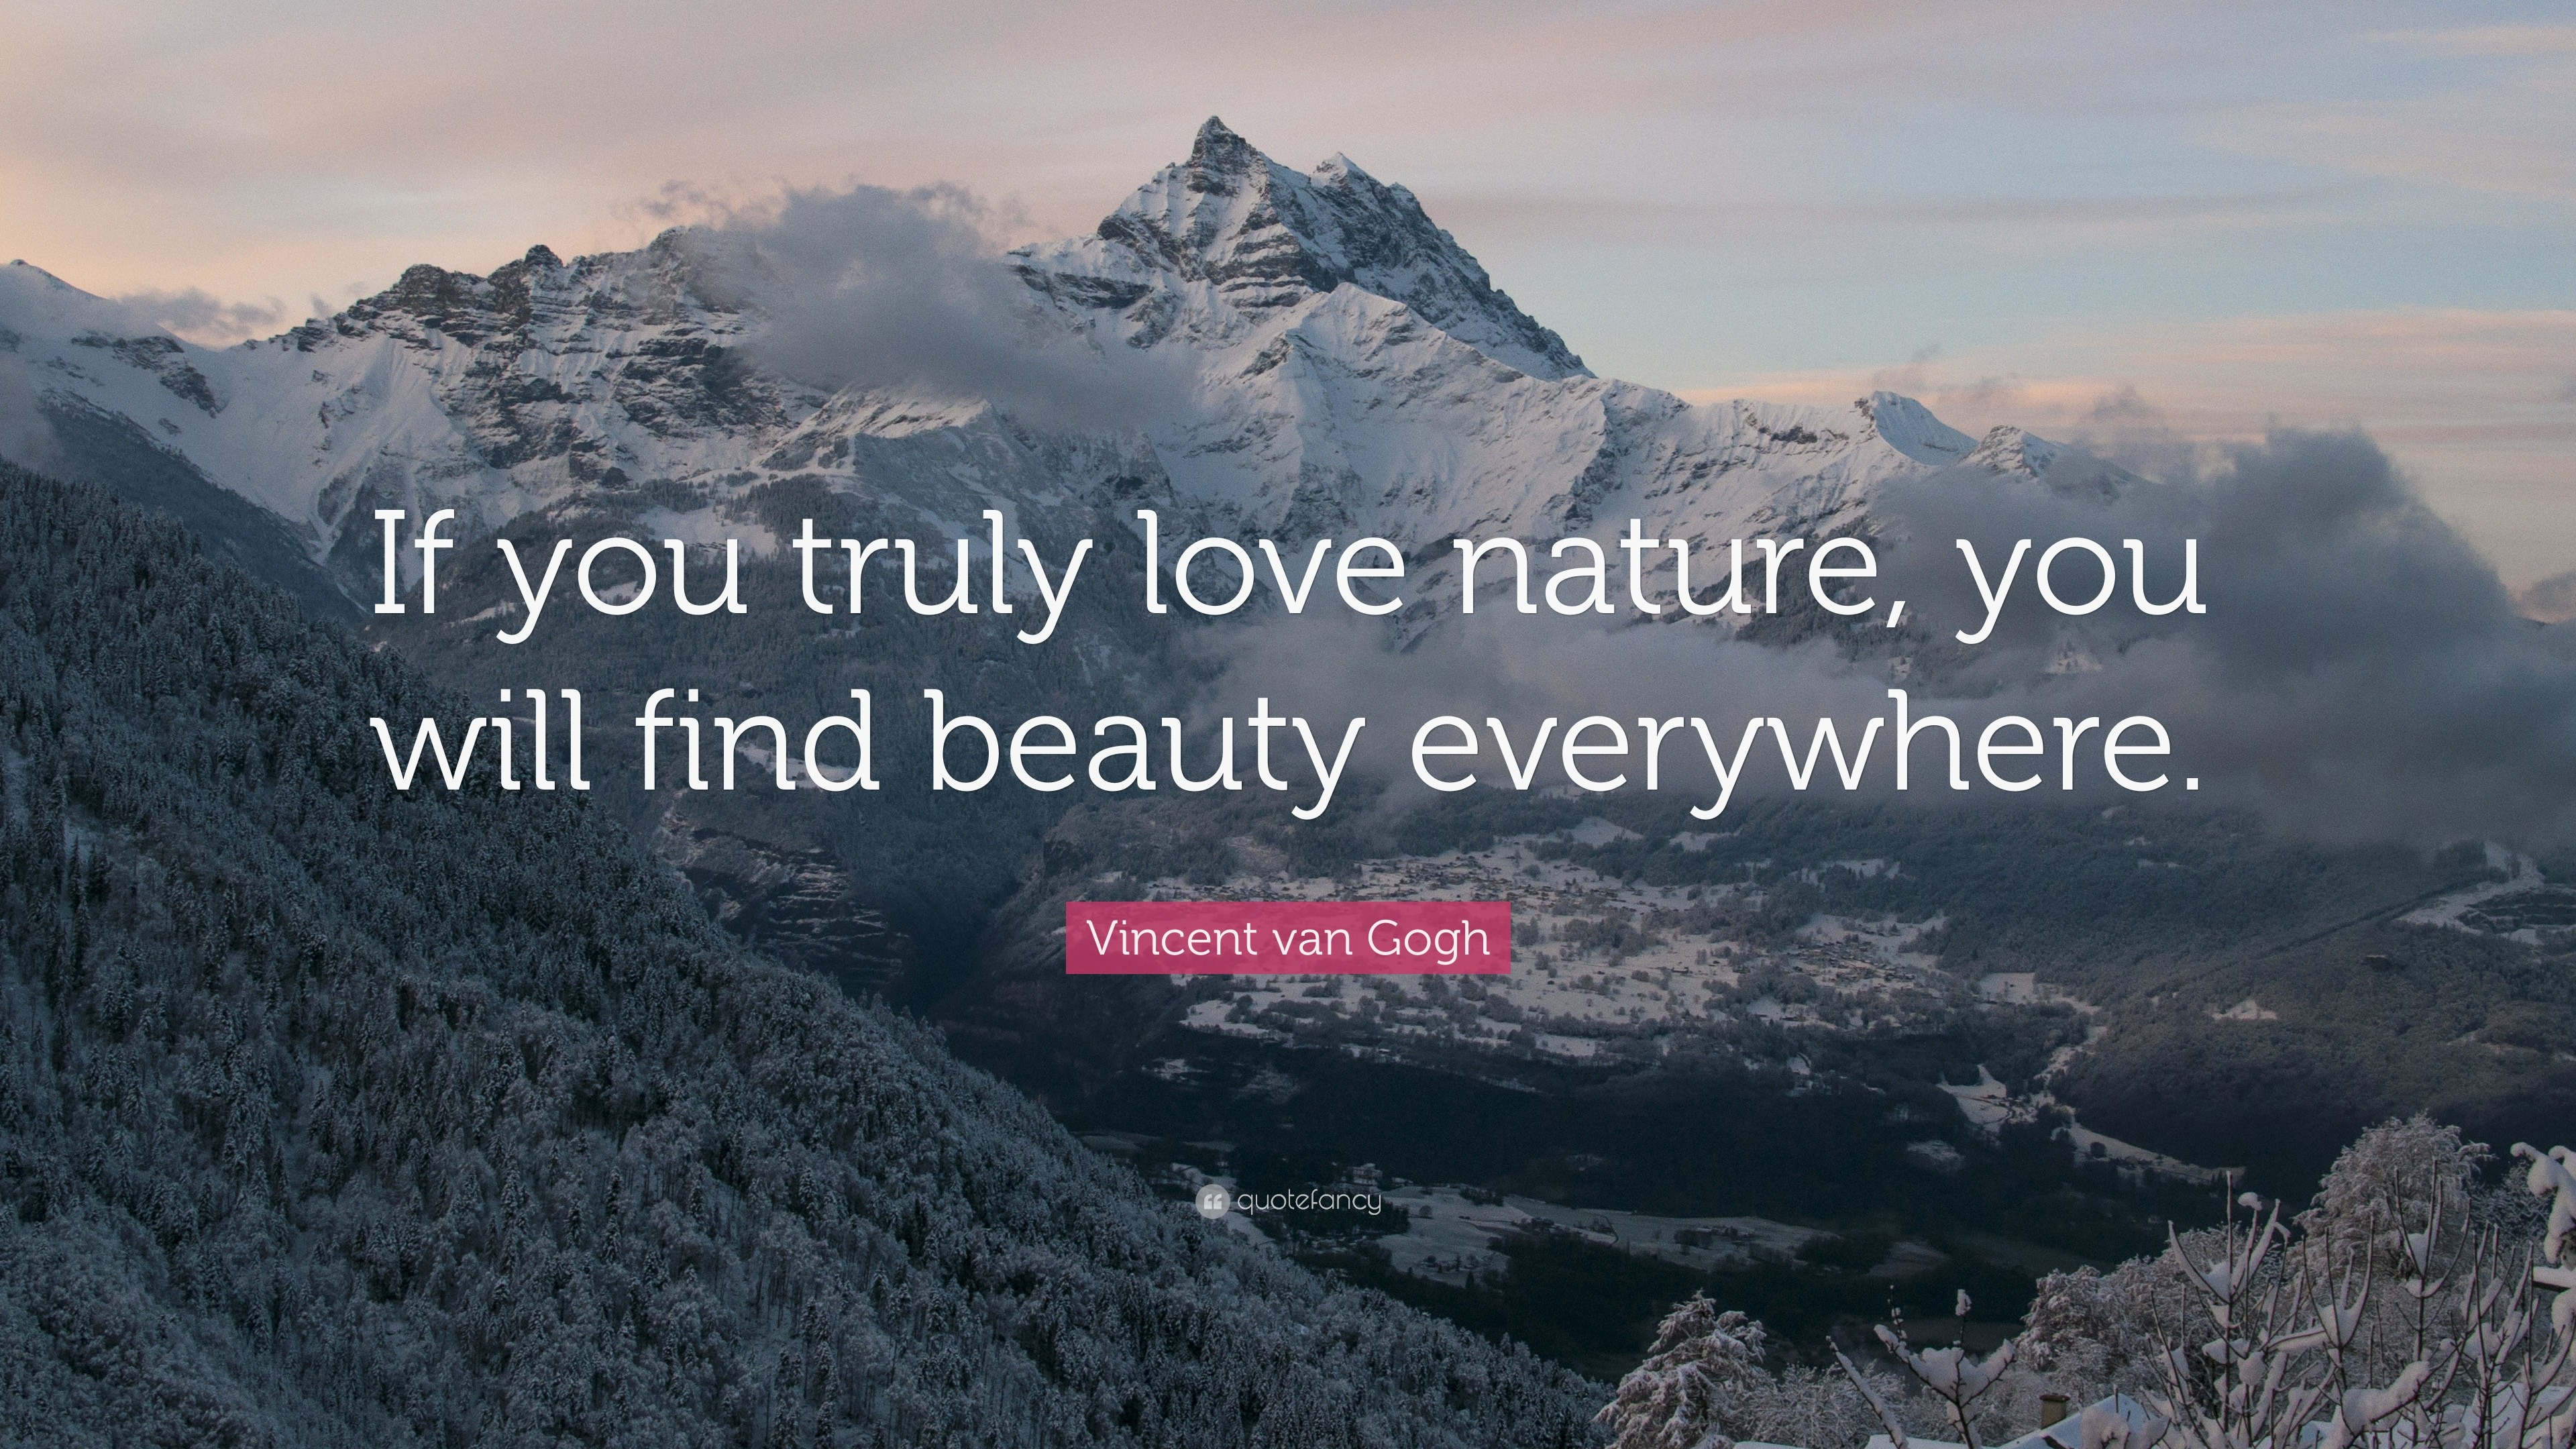 Vincent van Gogh Quote: â€œIf you truly love nature, you will find beauty